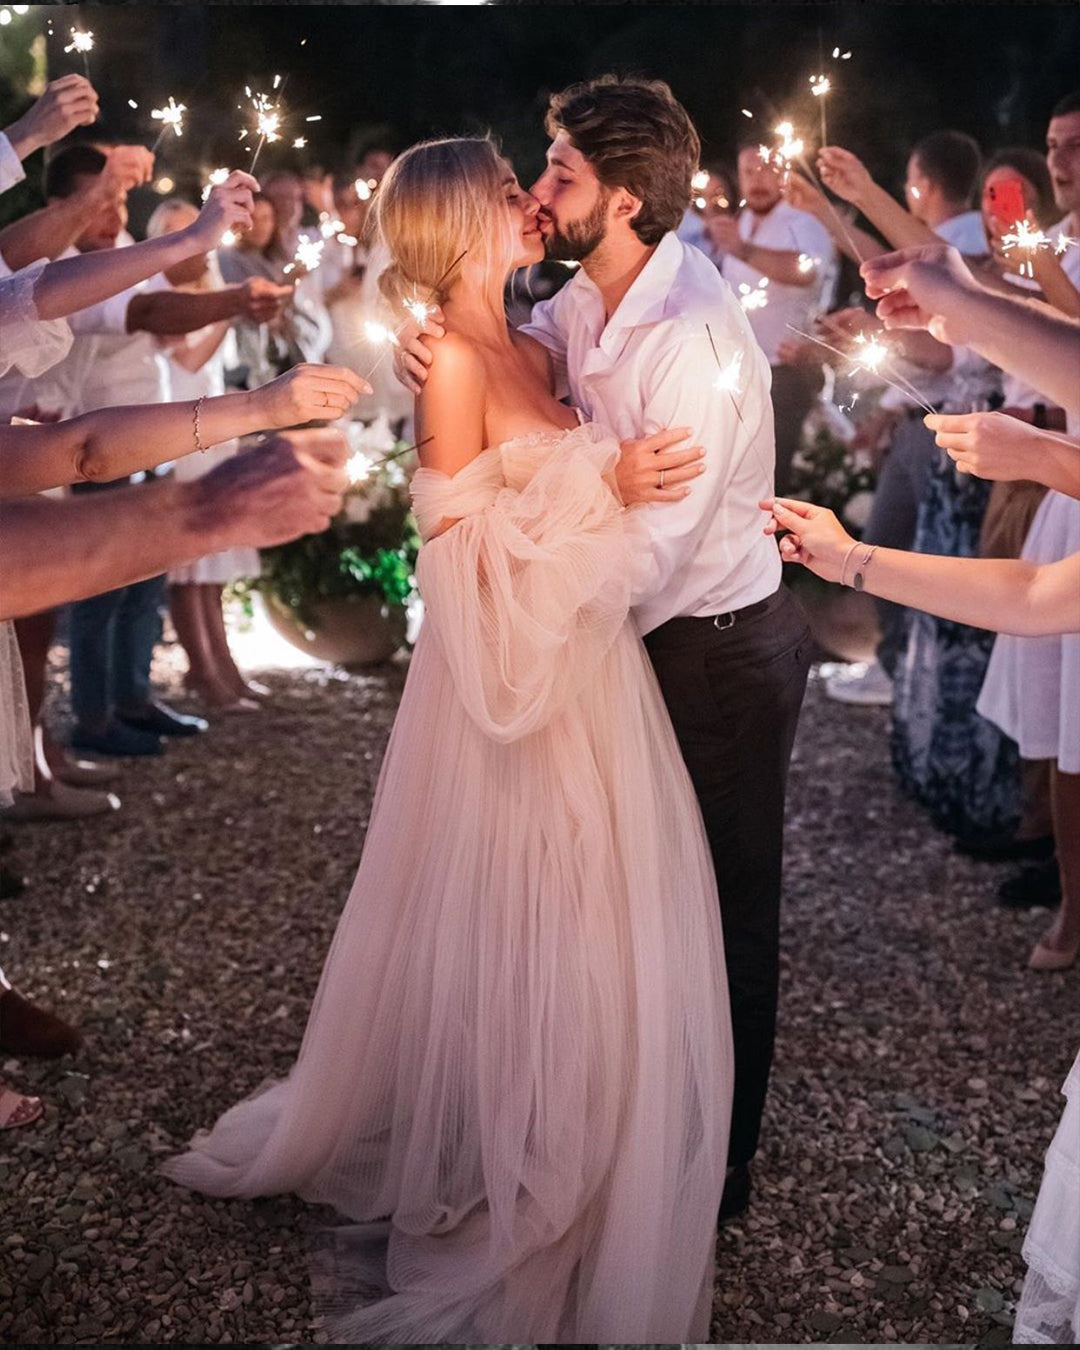 using sparklers for your wedding exit